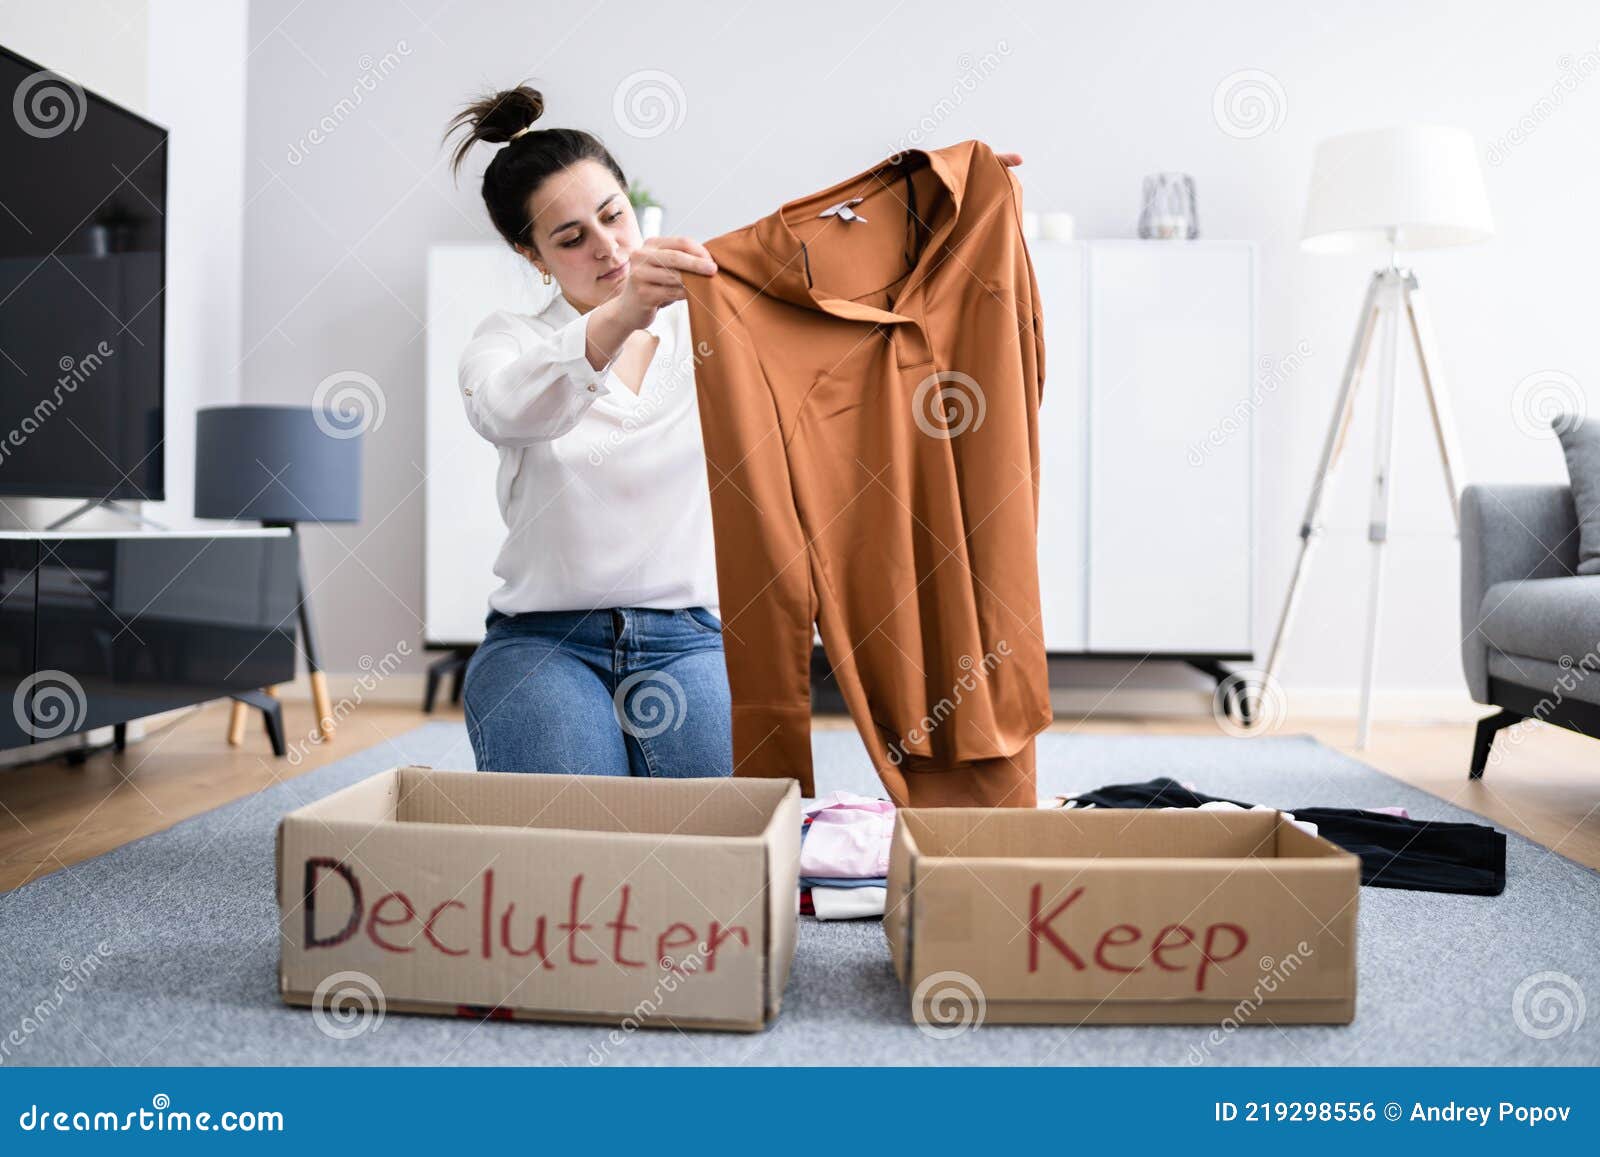 woman decluttering clothes, sorting